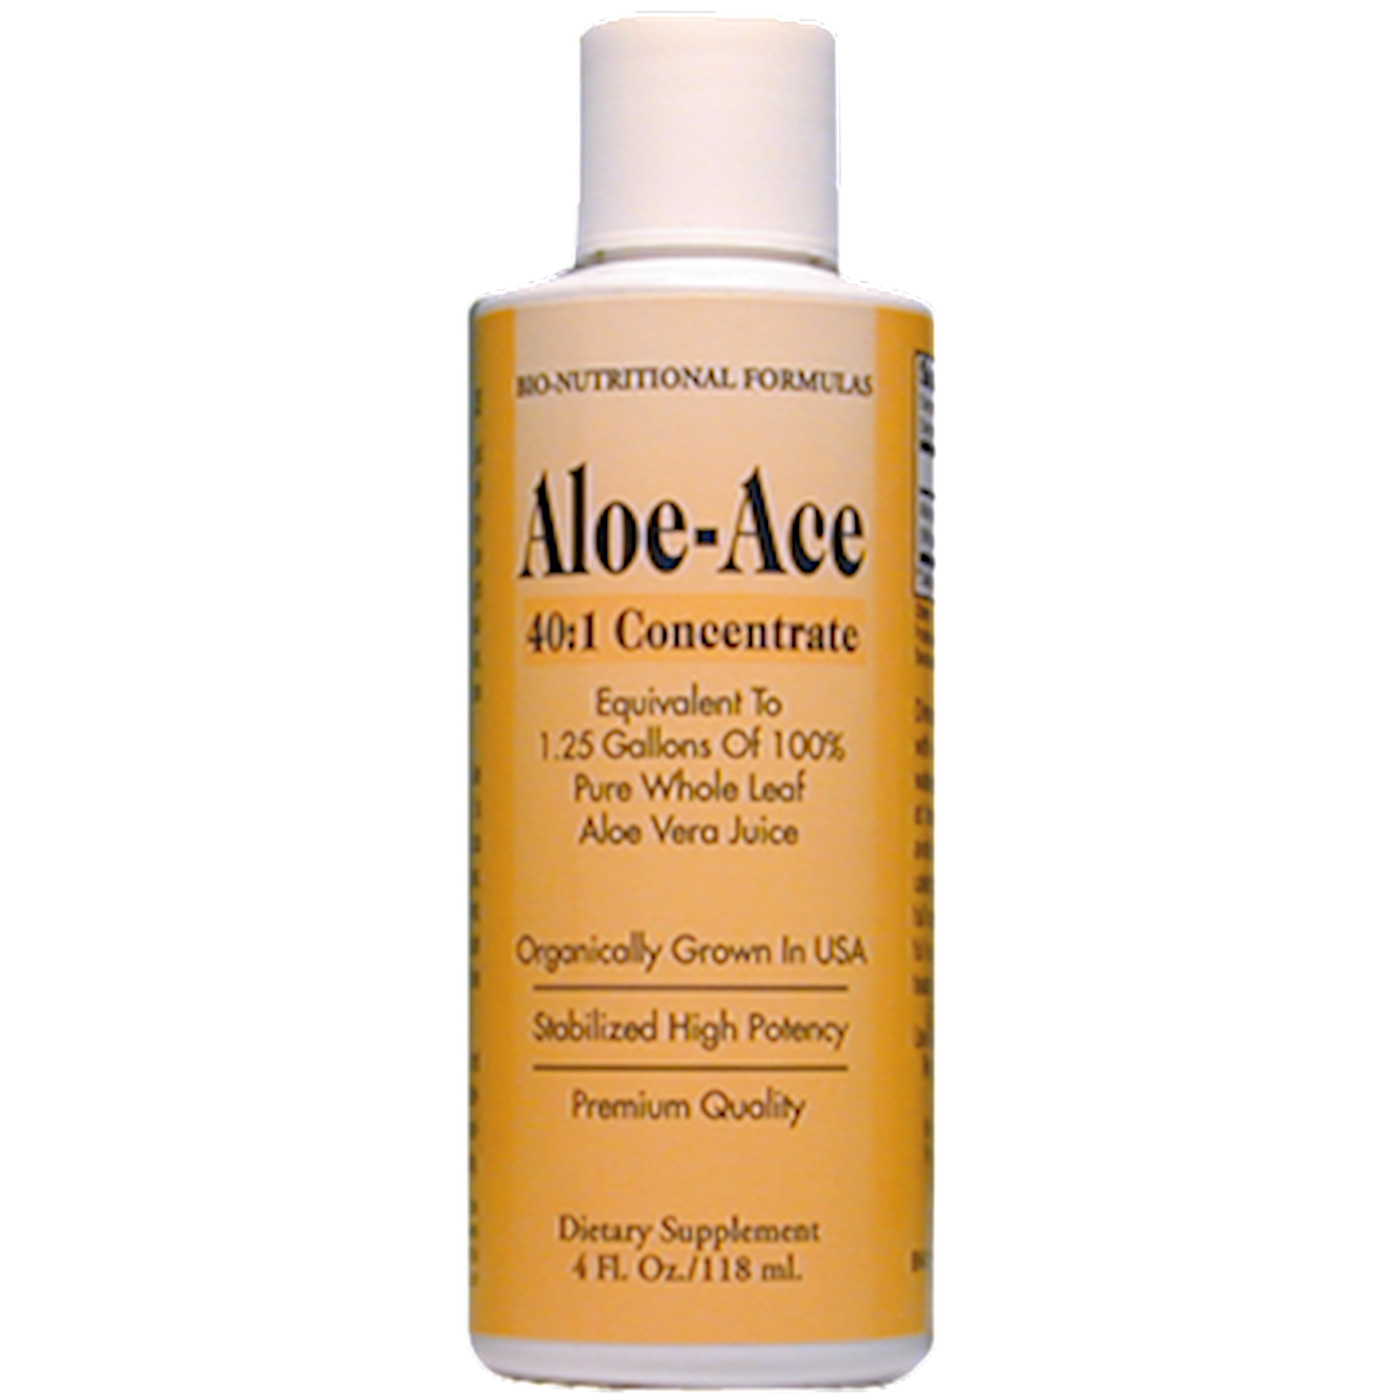 Aloe-Ace 40:1 Concentrate  Curated Wellness